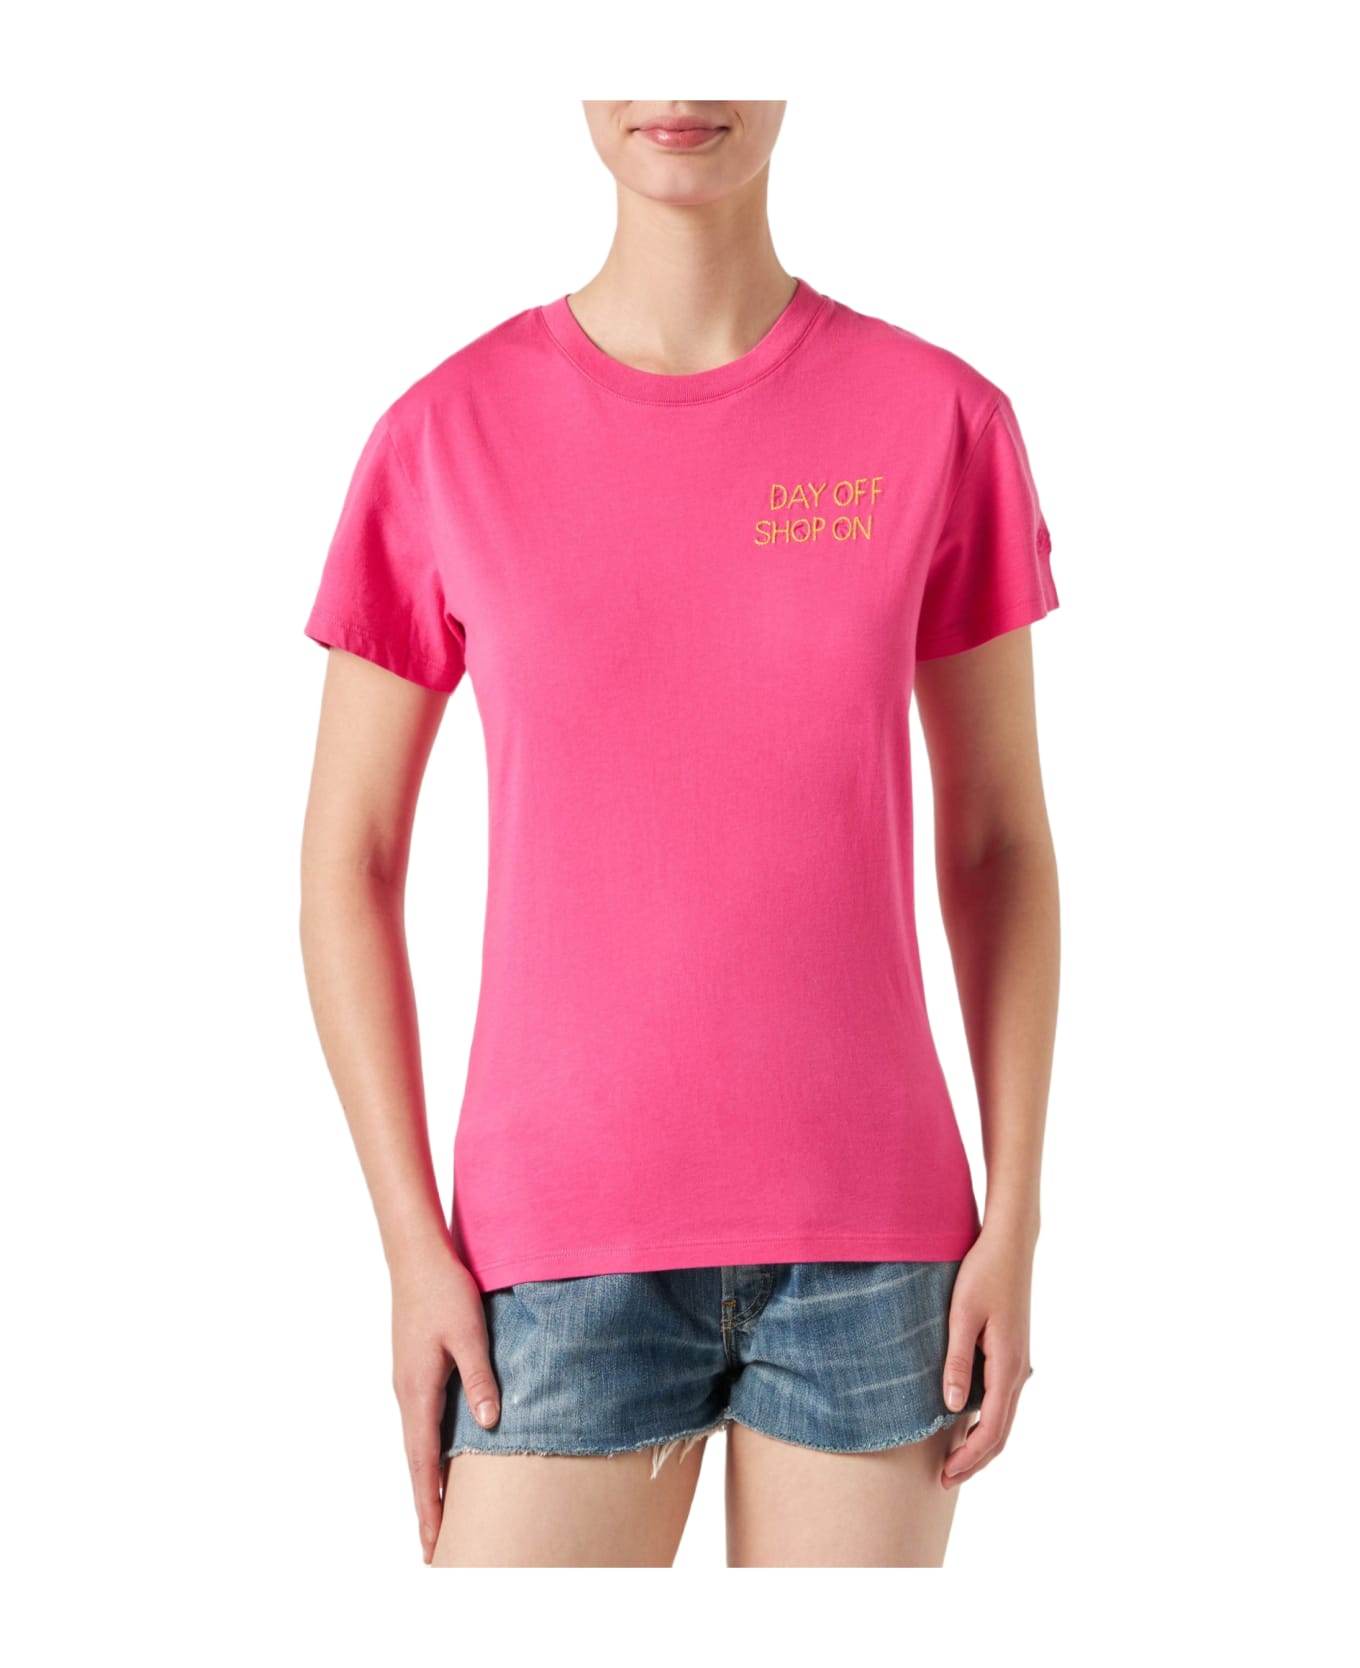 MC2 Saint Barth Woman Fucsia Cotton T-shirt With Embroidery - PINK